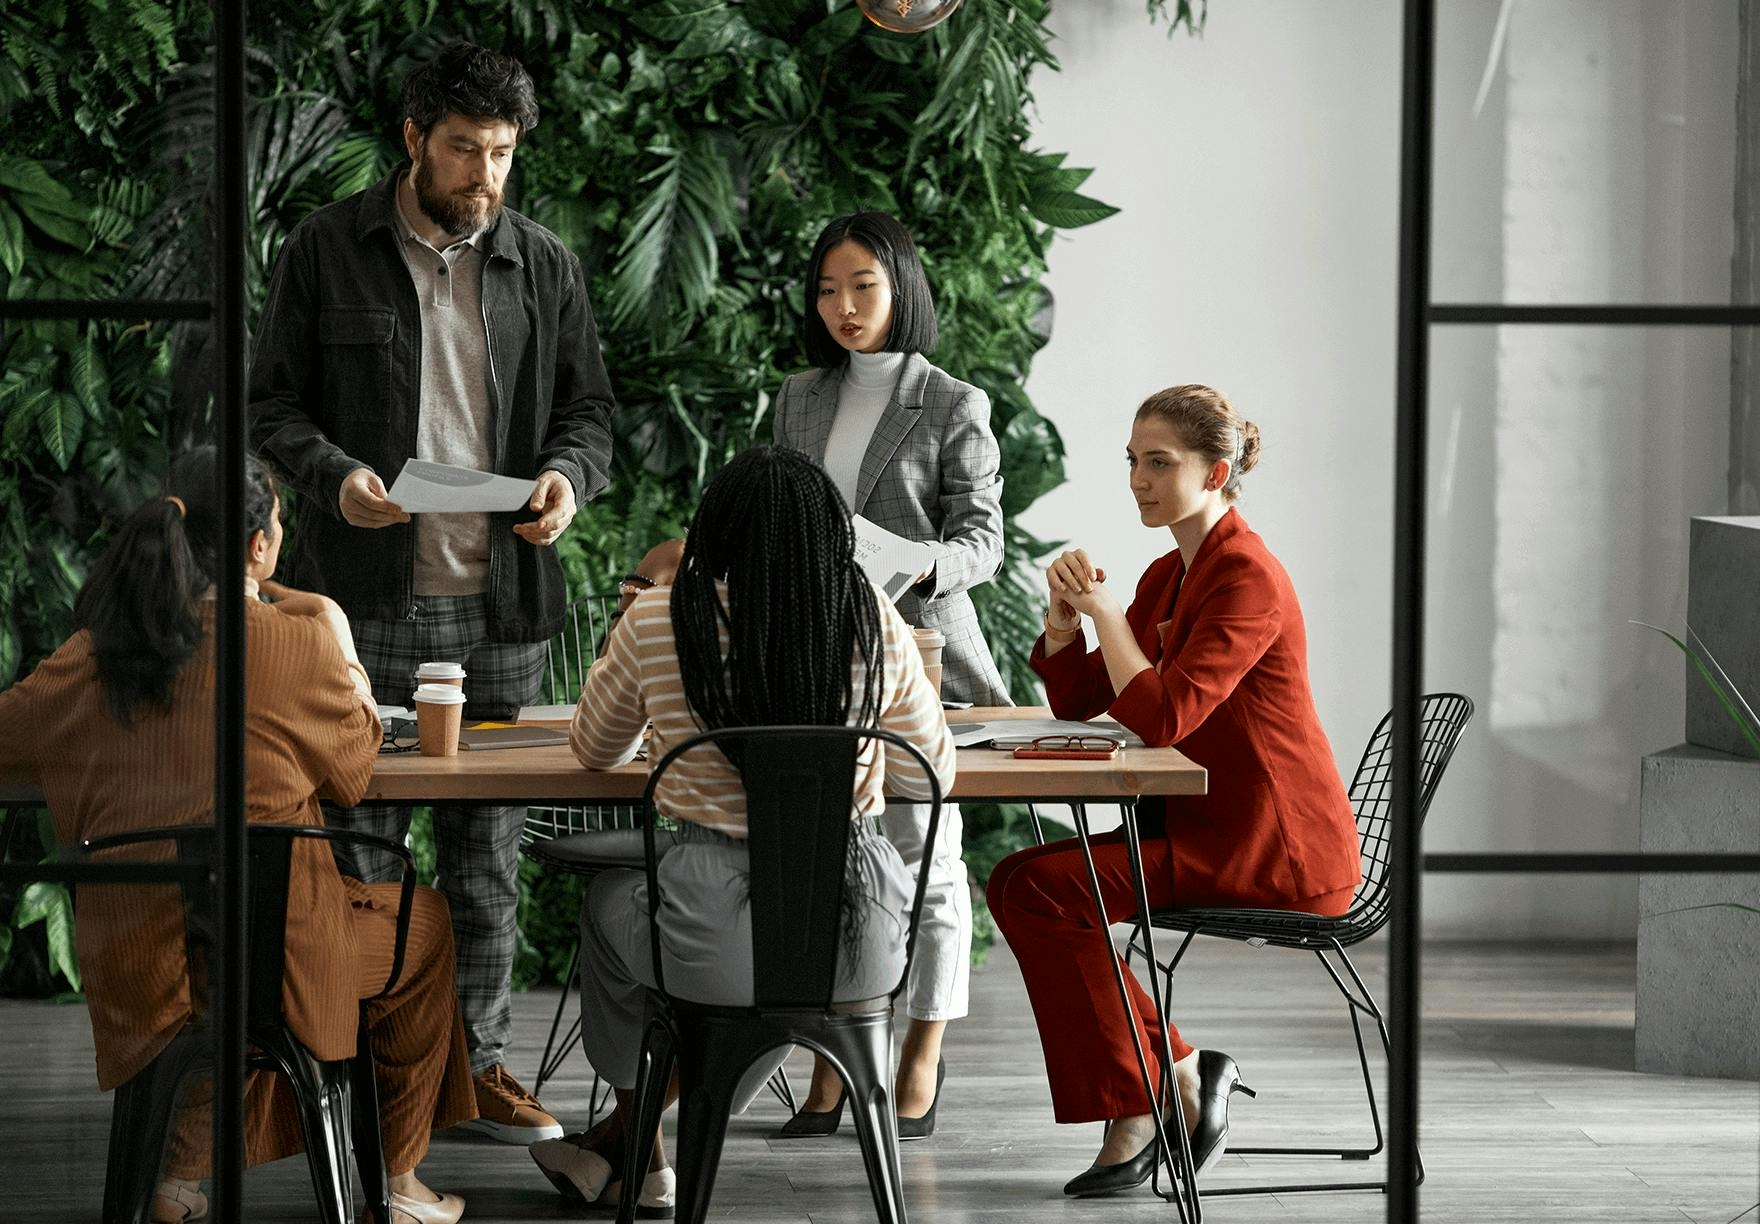 A group of people gathering at a table with documents and coffee